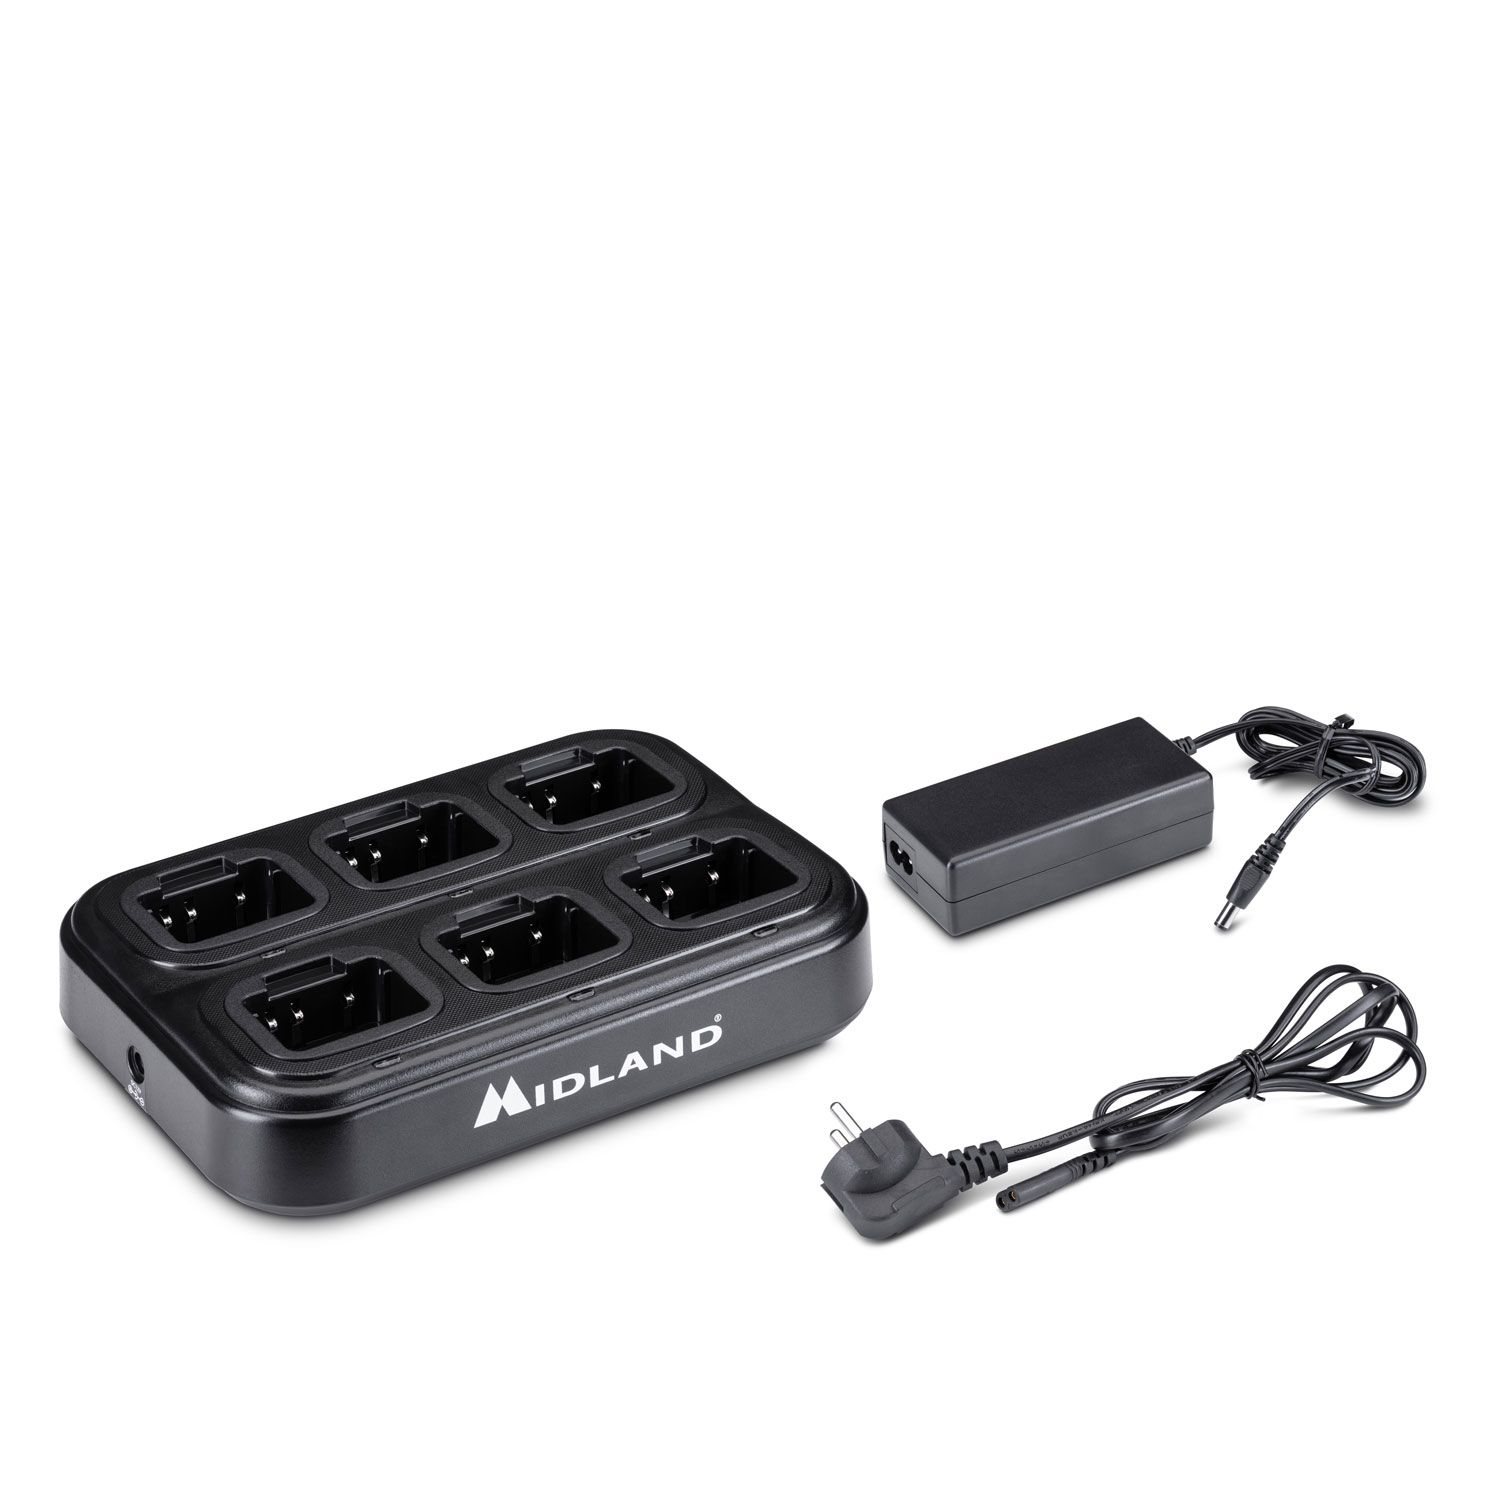 MULTI CA PB-G15 PRO multiple 6 position charger